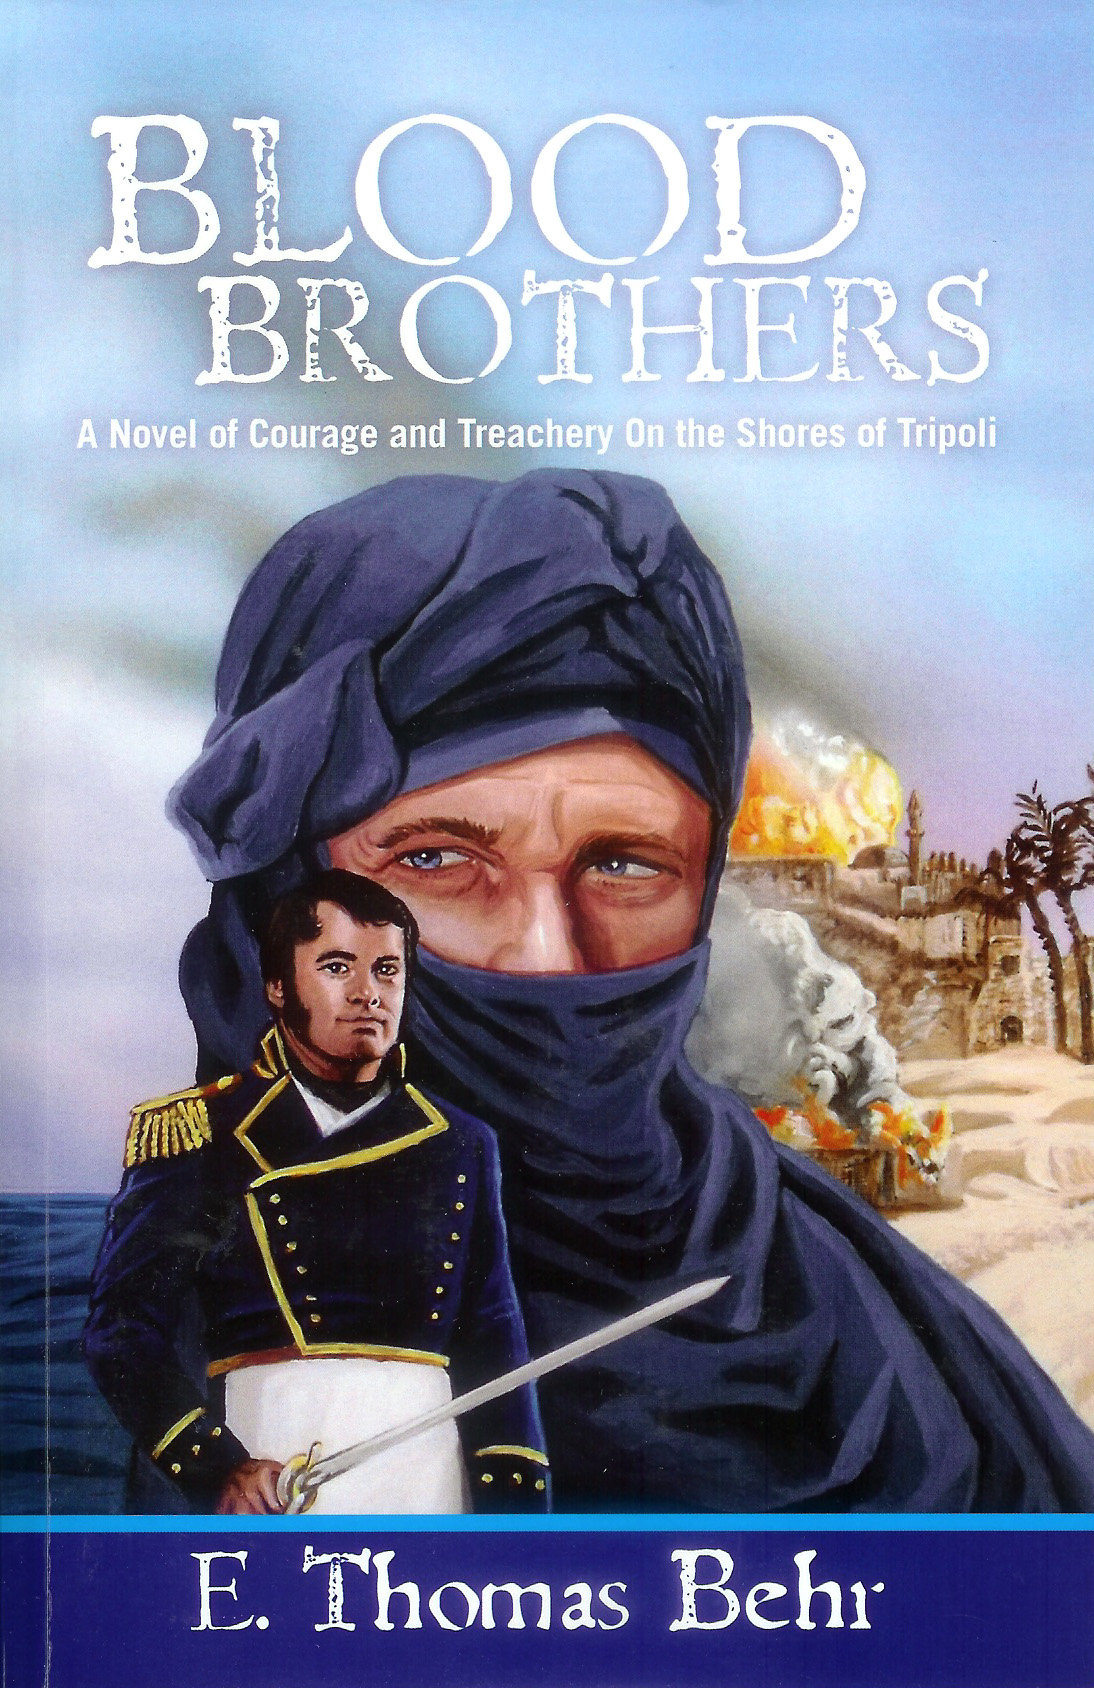 Brother novel. Courage brothers.